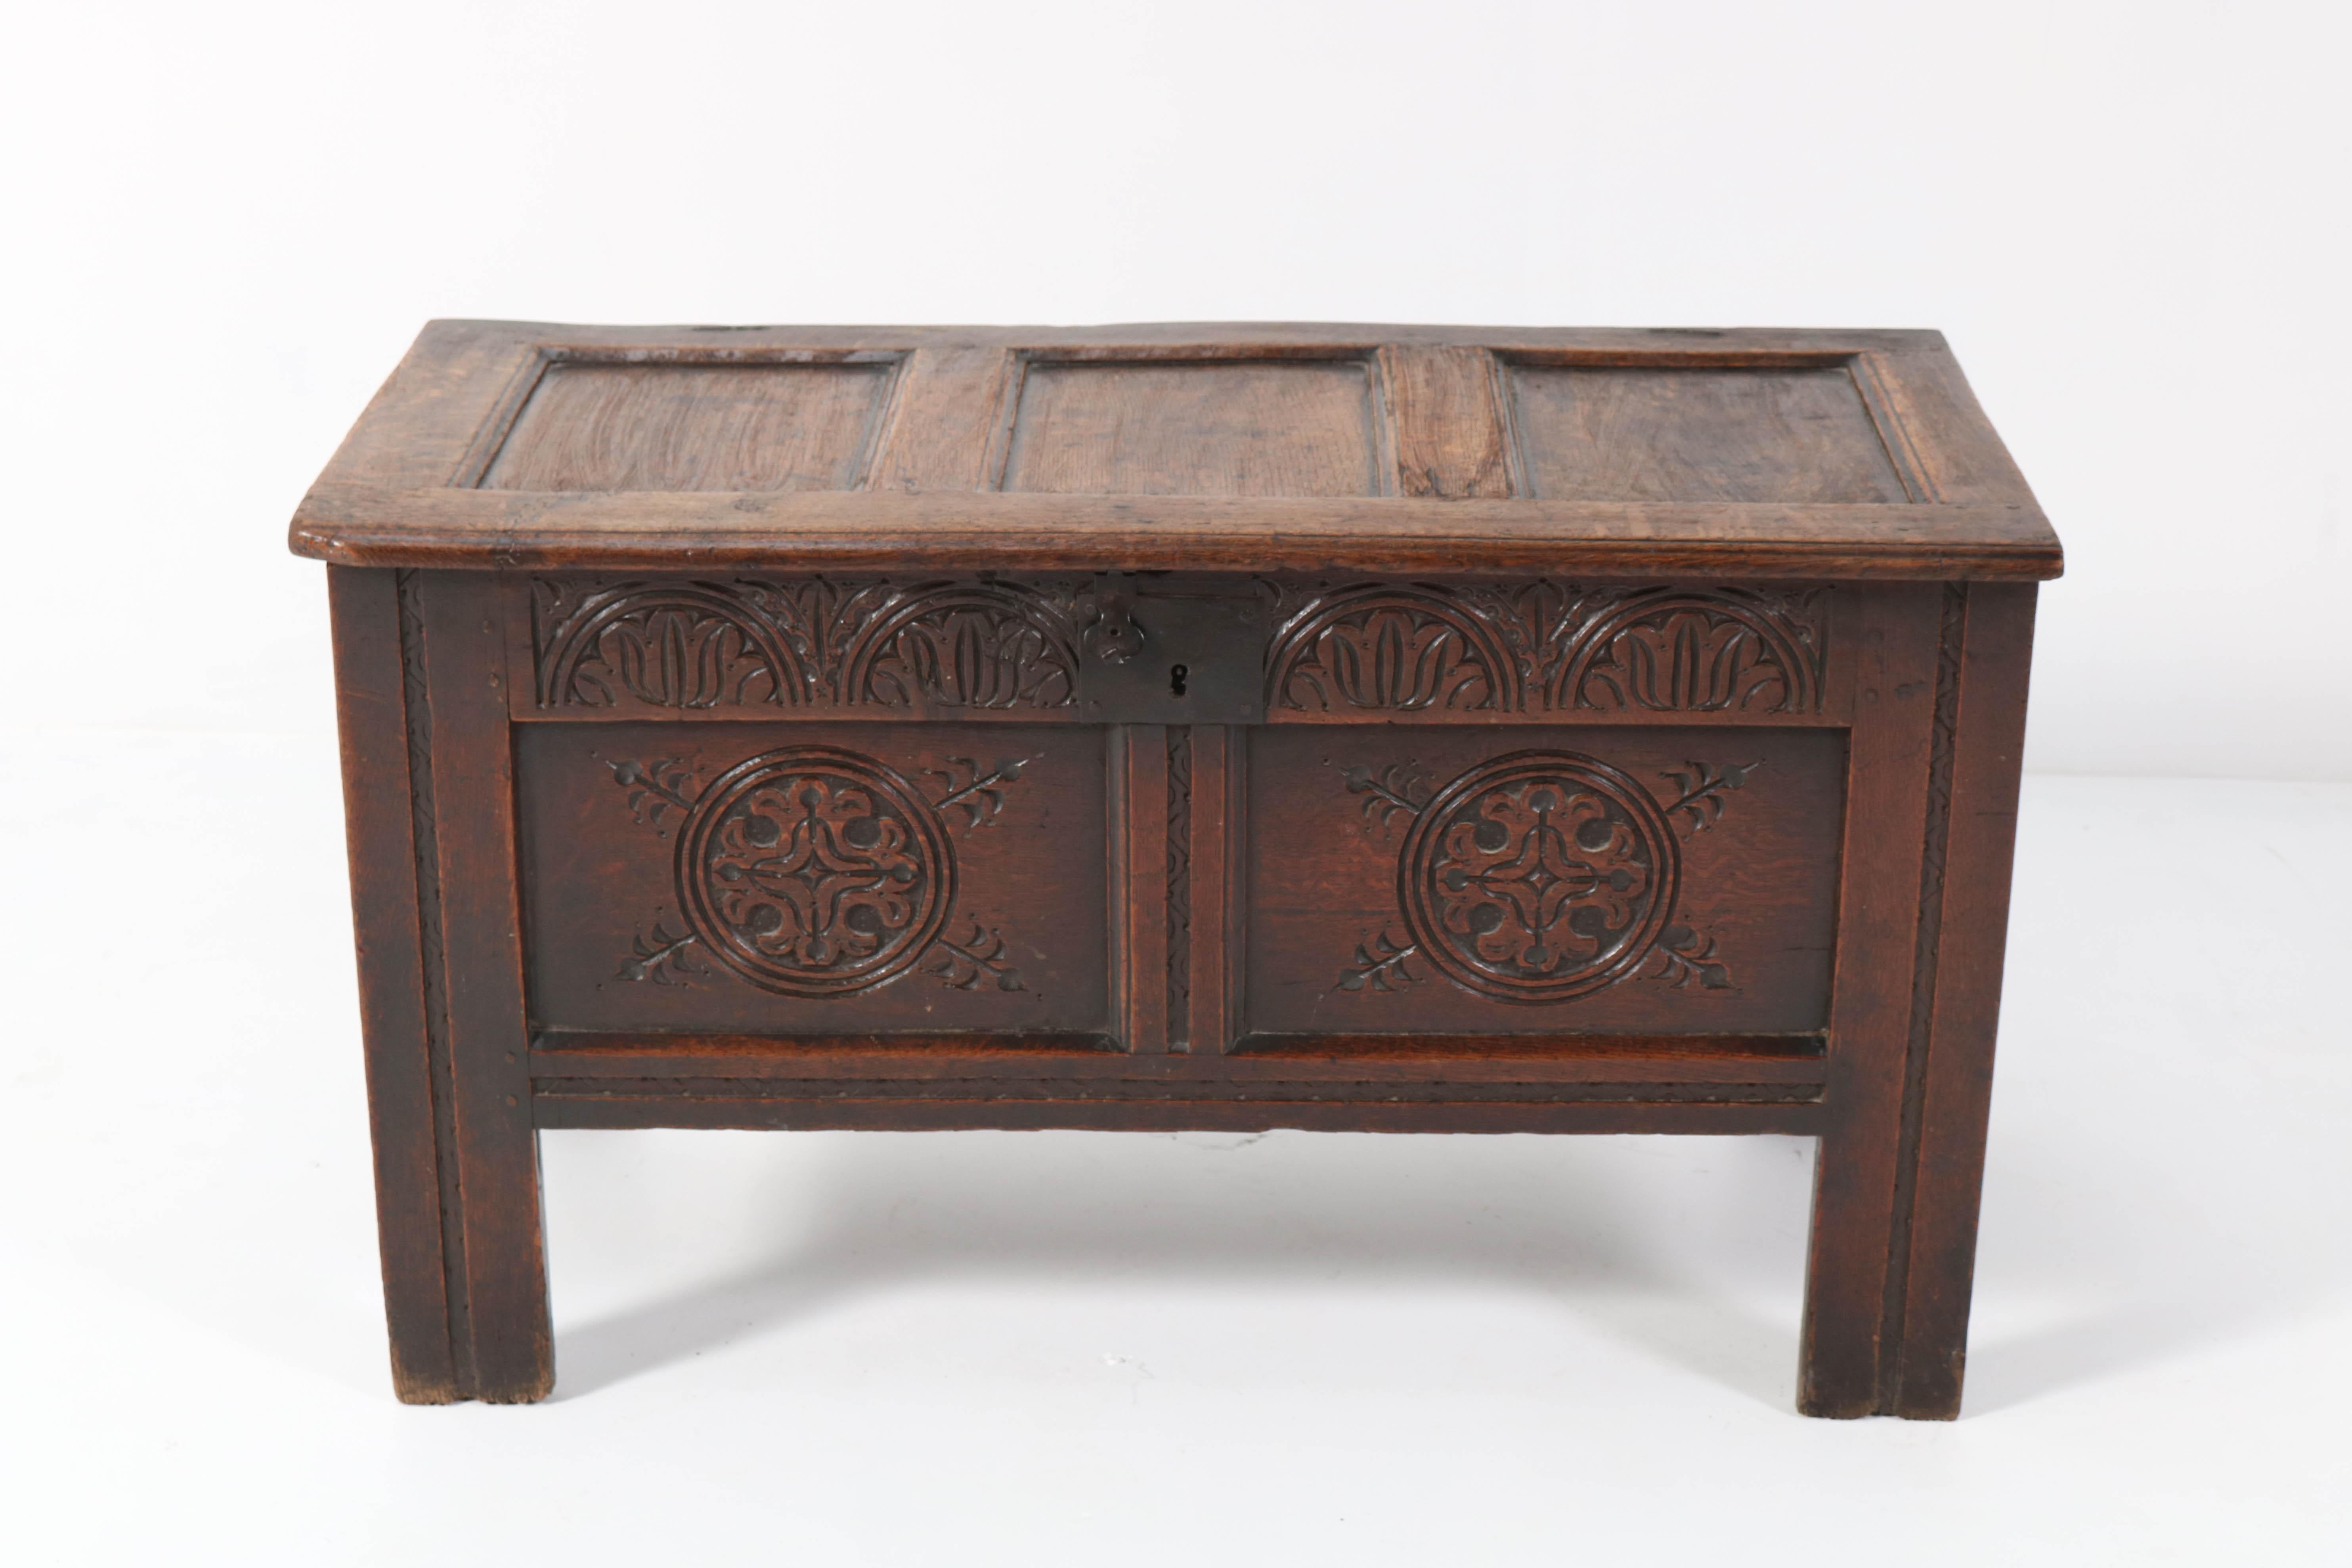 British 18th Century English Carved Oak Blanket Chest or Coffer